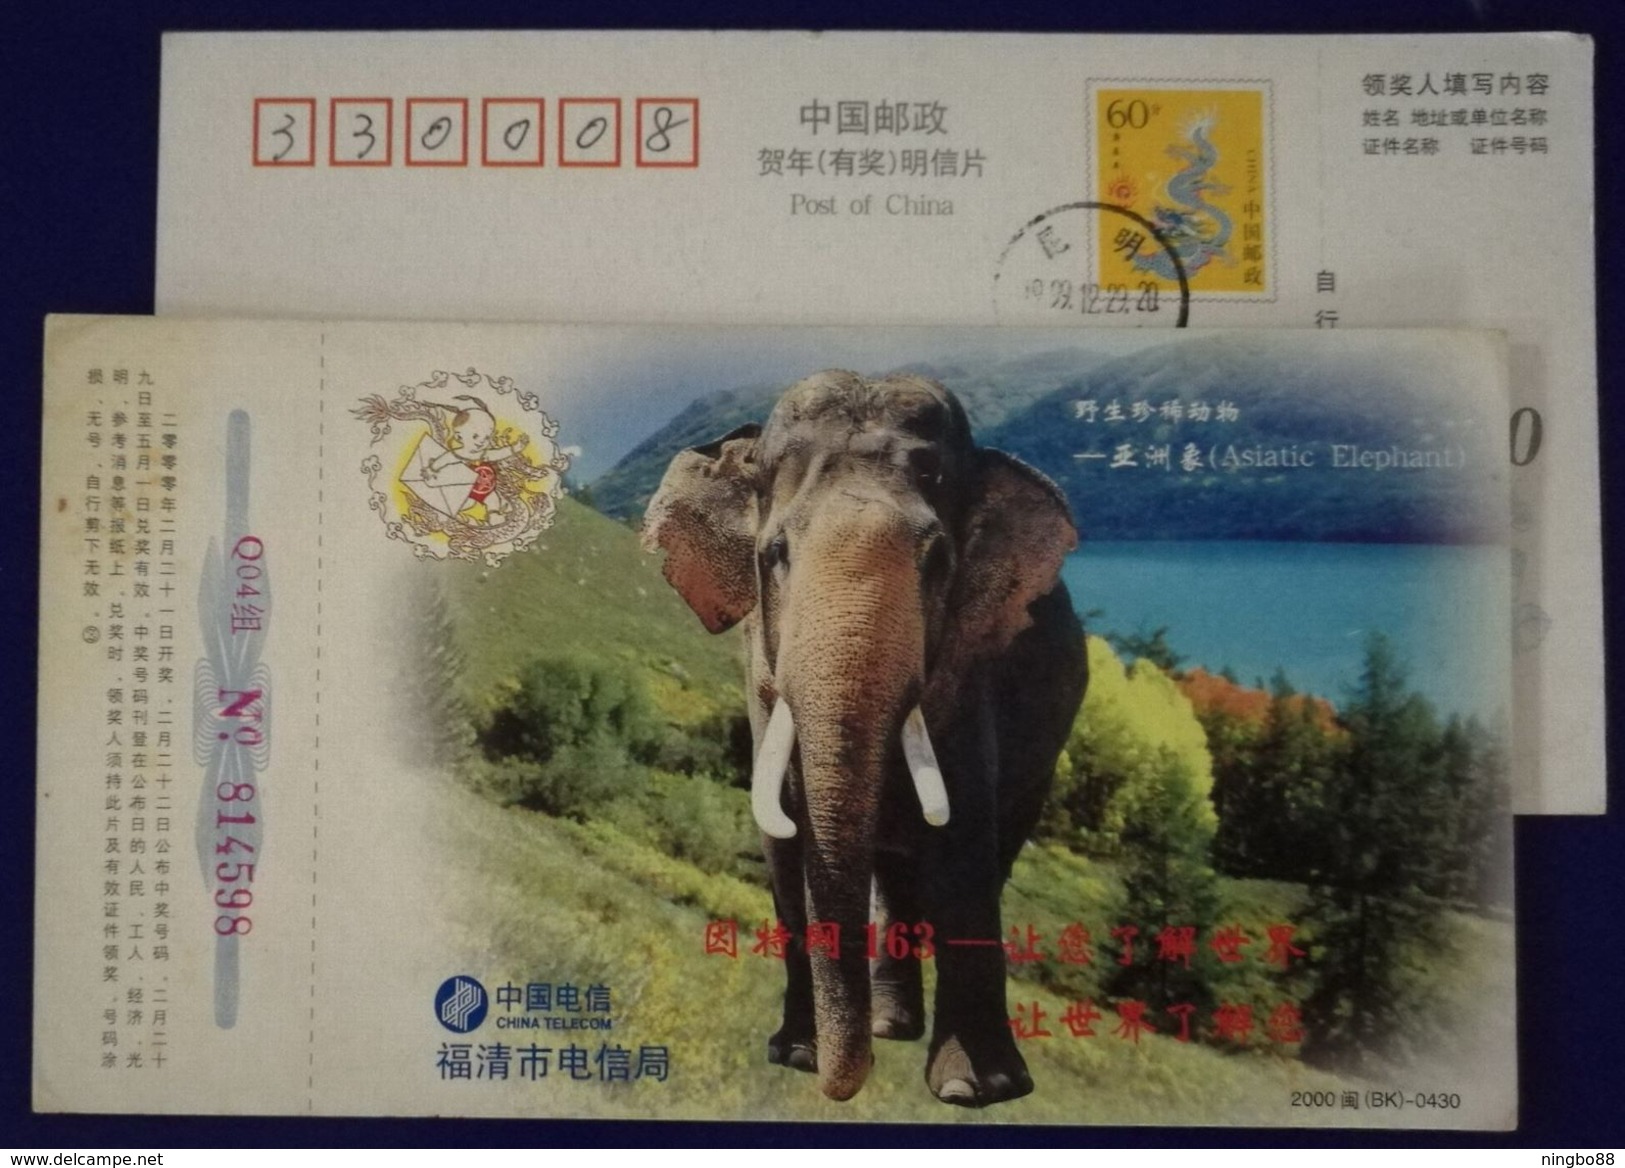 China 2000 Fuqing Telecom New Year Greeting Pre-stamped Card Rare Asiatic Elephant - Elephants